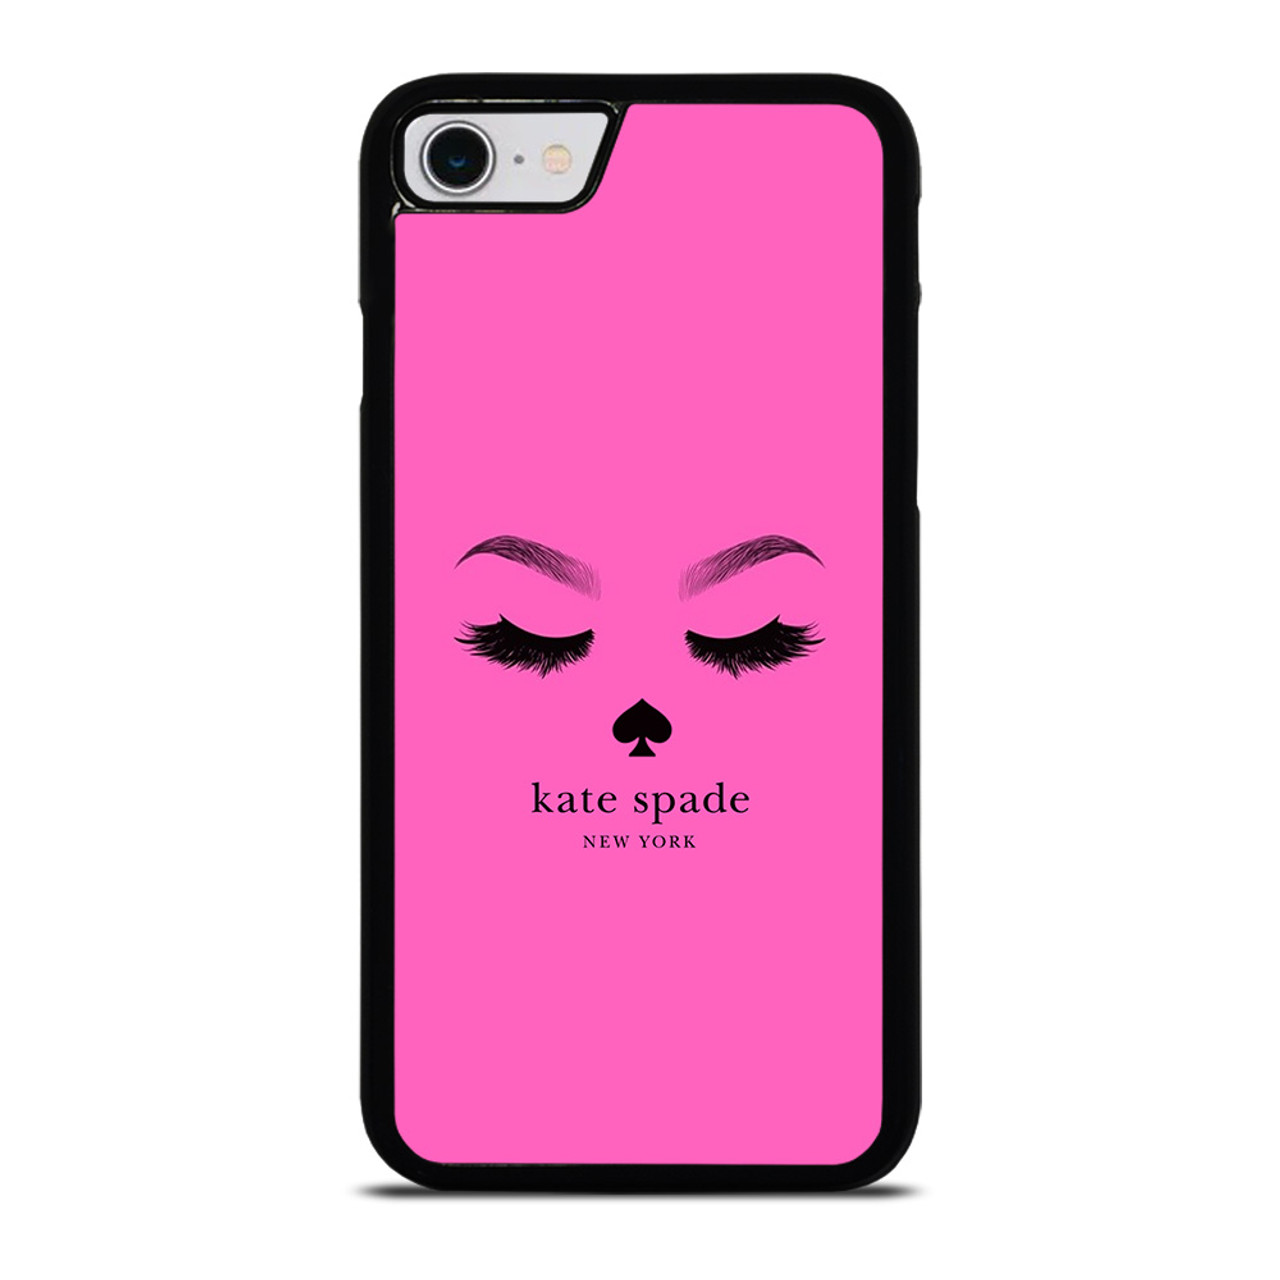 KATE SPADE PINK EYEBROW iPhone SE 2022 Case Cover